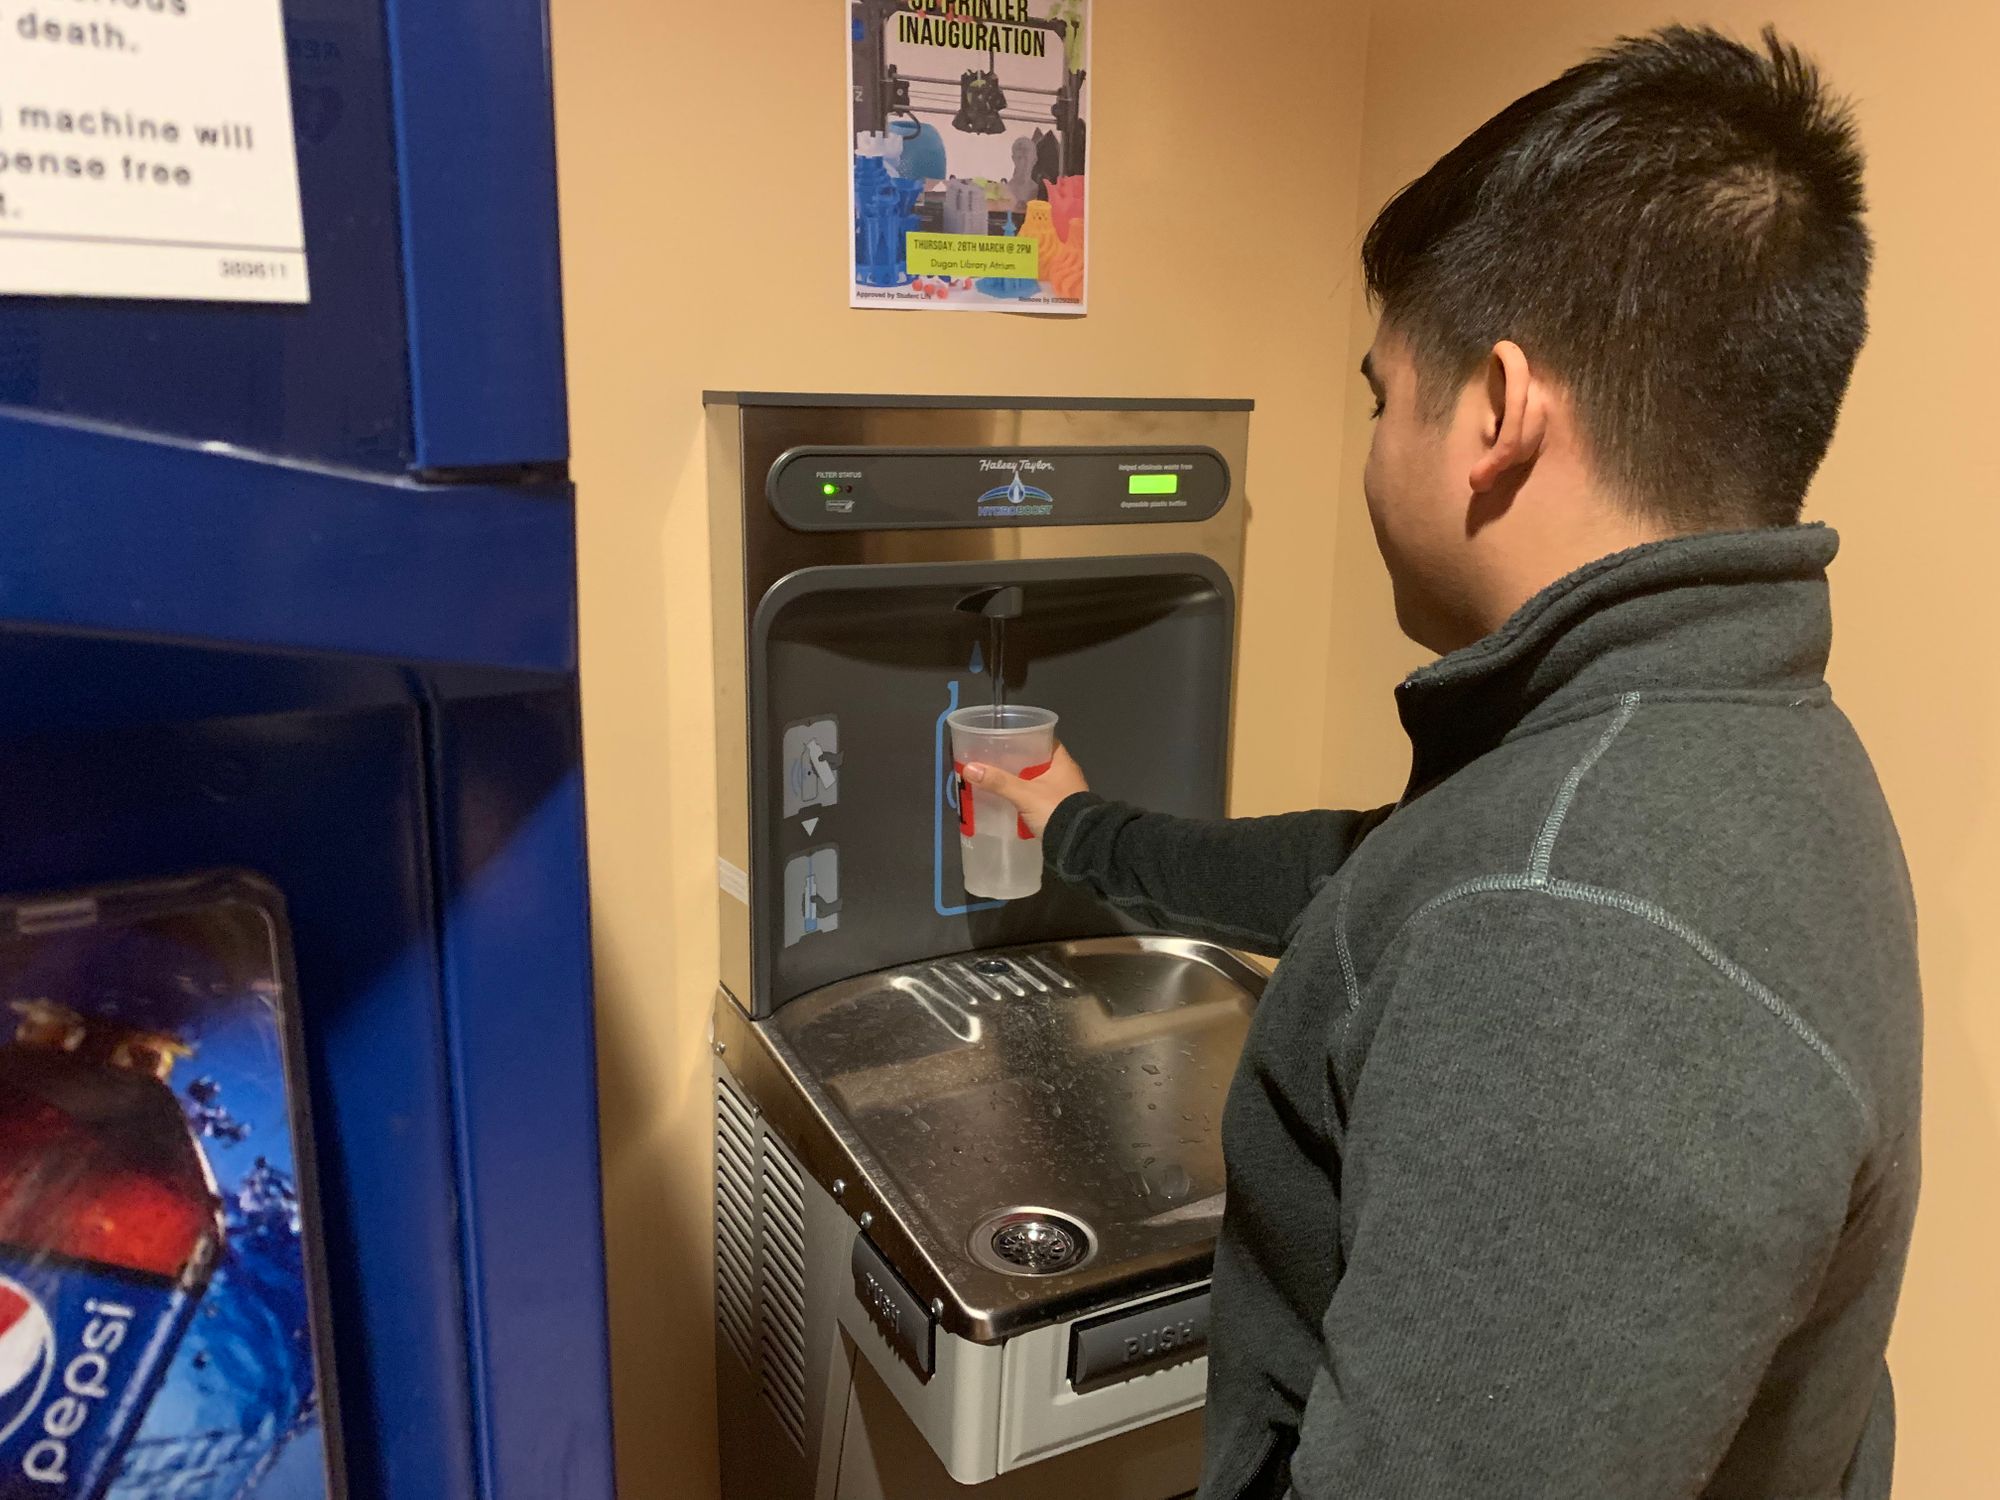 Water fountains get upgraded to fill stations